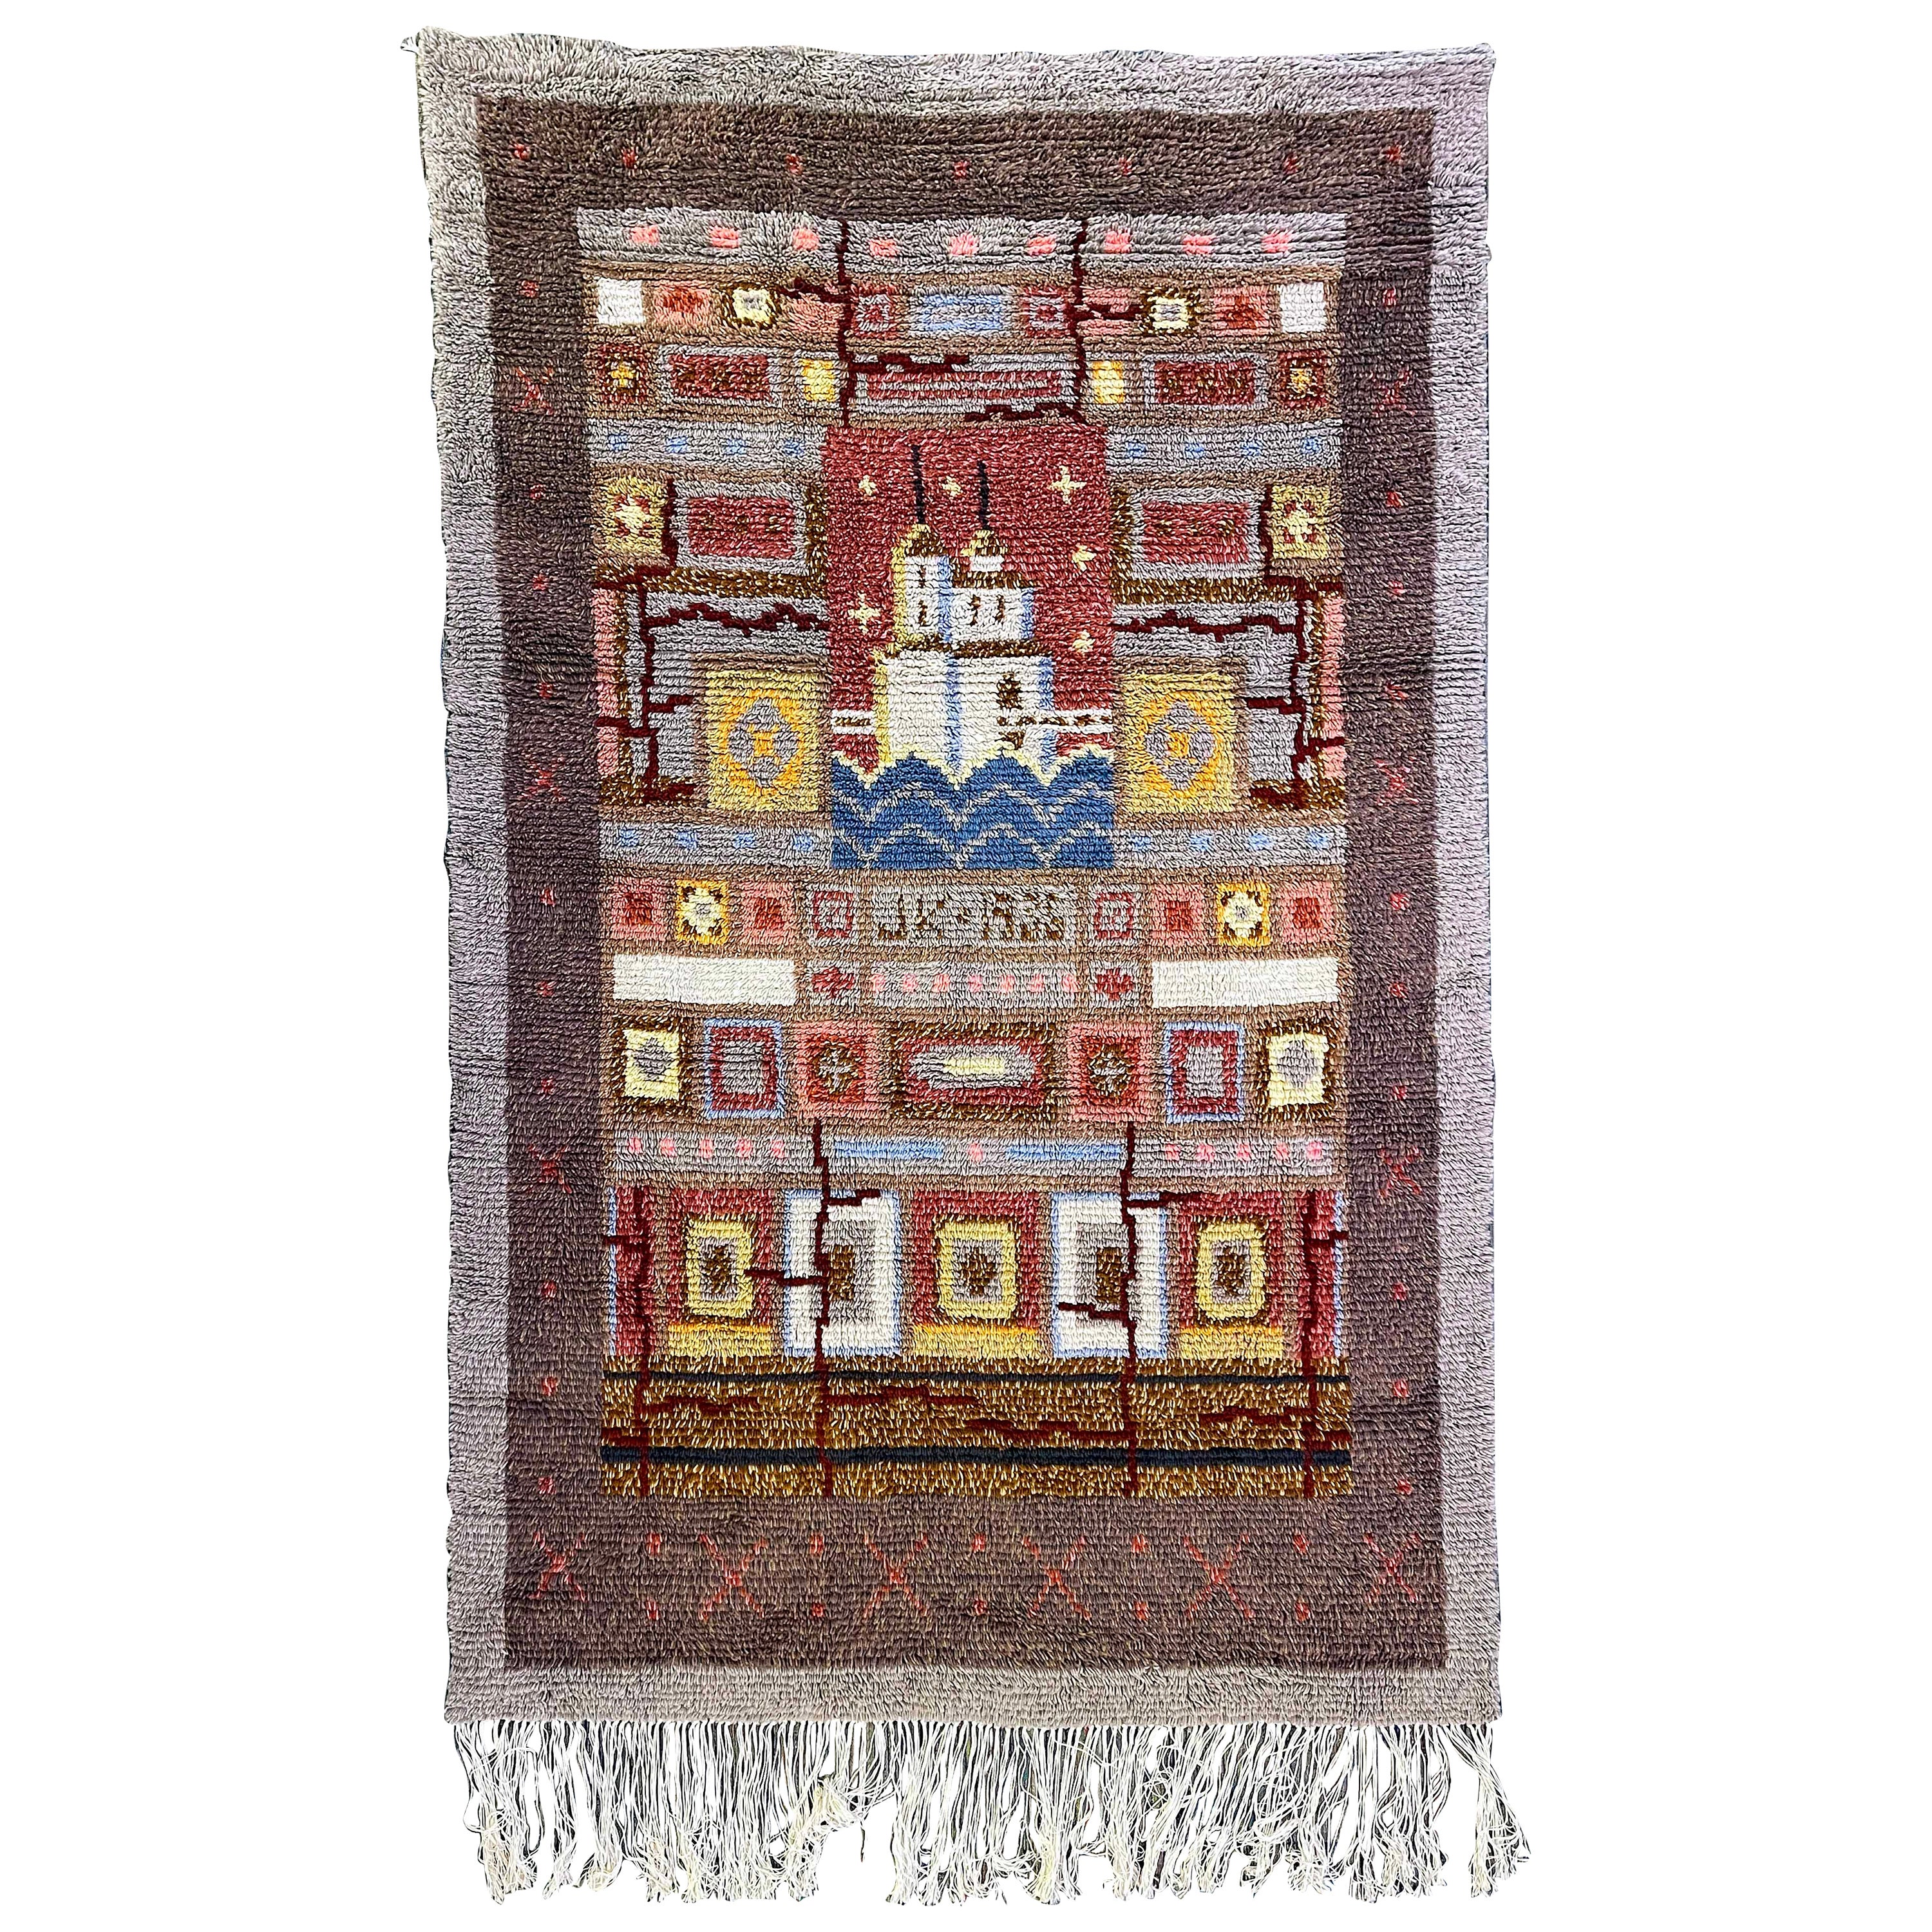 "Kajaani Castle", Important Art Deco Ryijy Rug w/ Coat of Arms by Pia Katerma